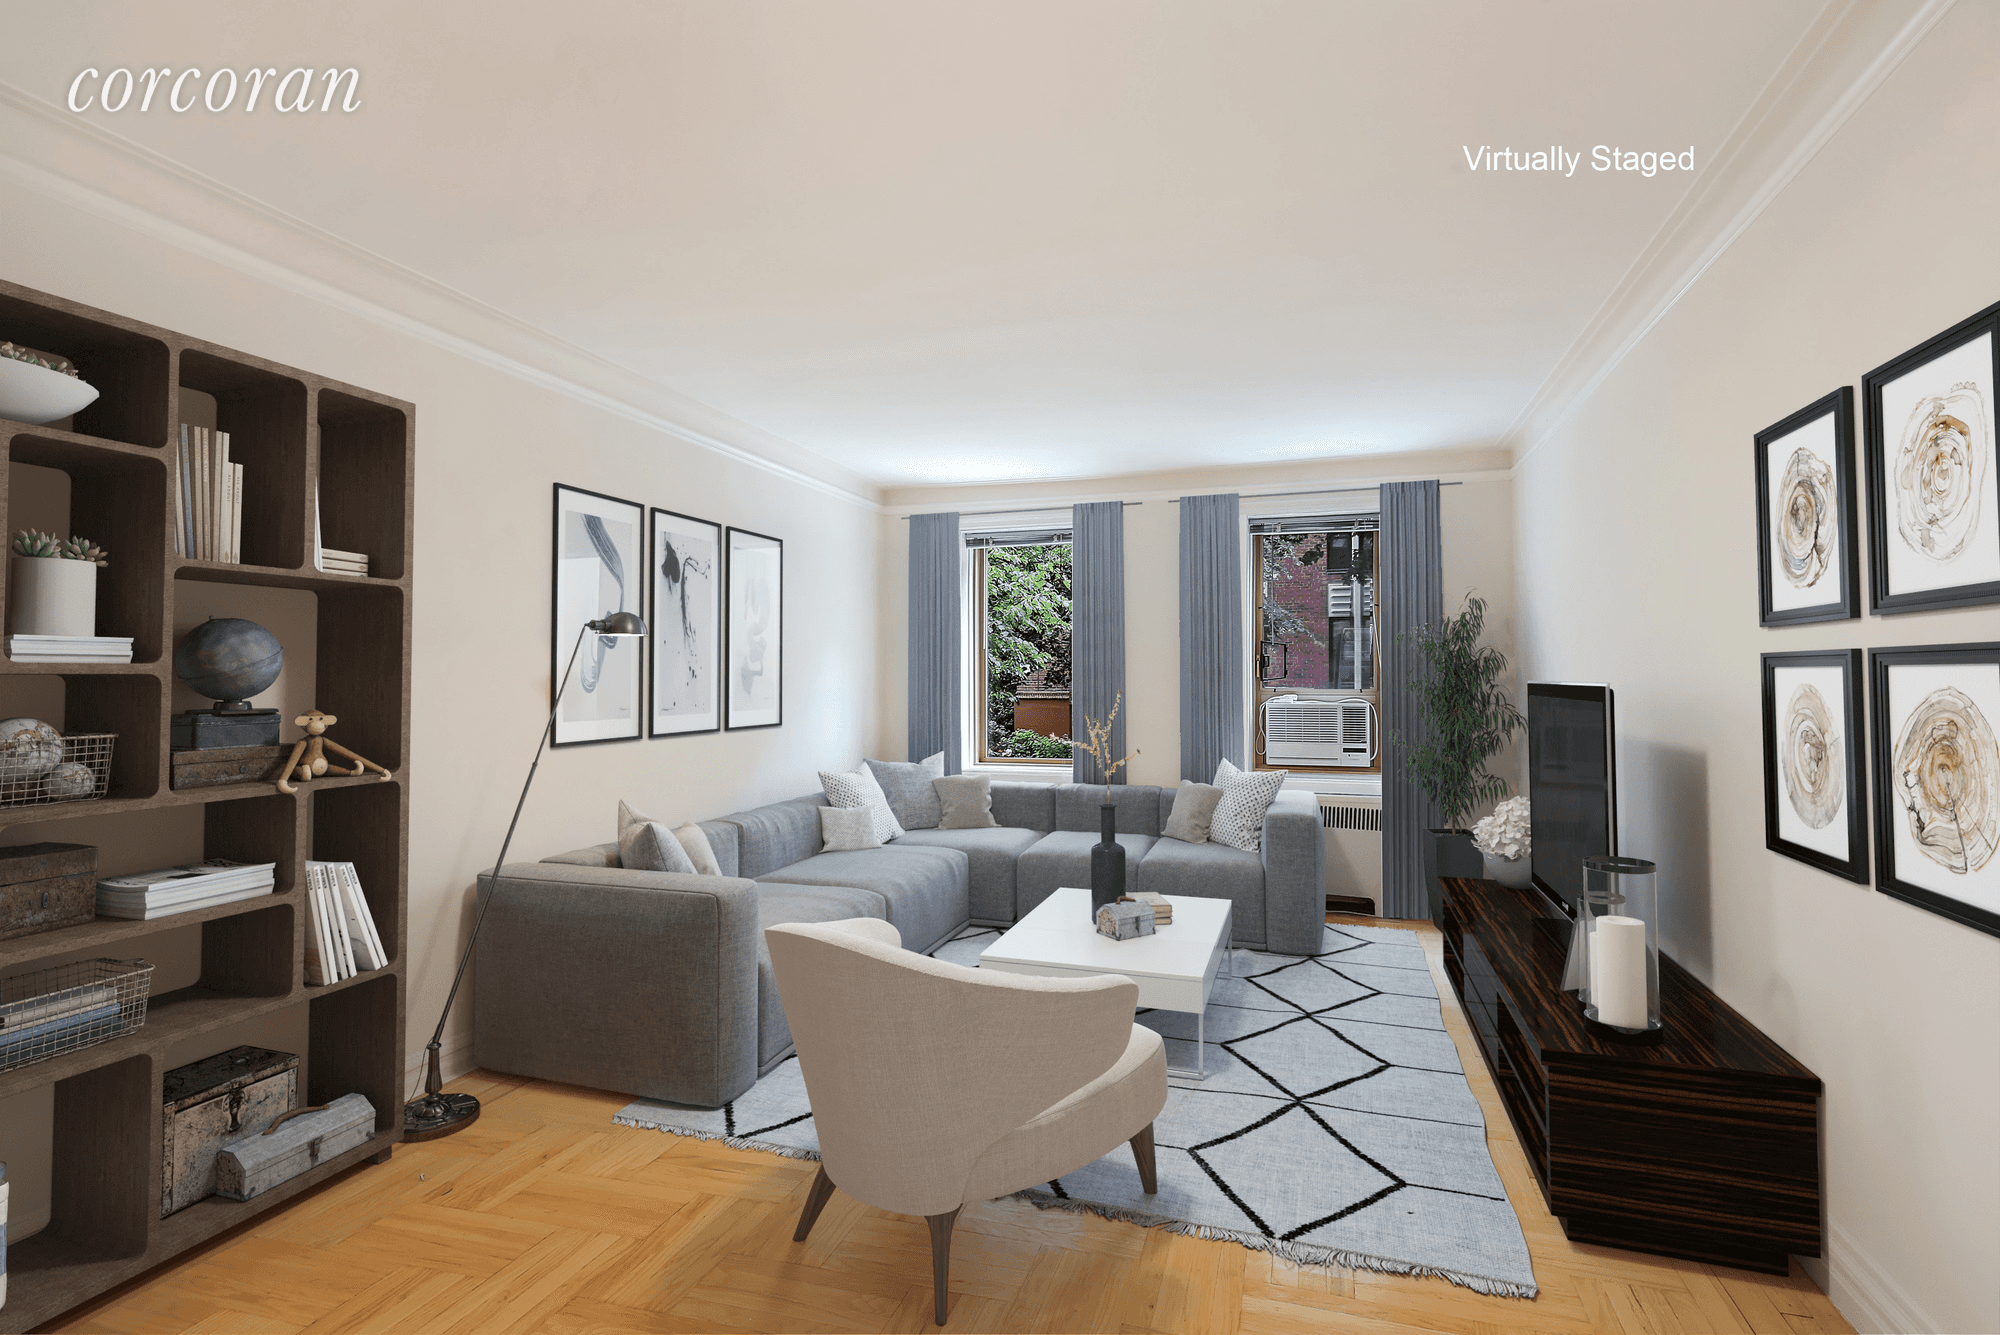 INWOODS MOST ENCHANTING OFFERING This gorgeous RAISED 1st FLOOR corner 2 bedroom 2 bath has graceful proportions with impeccably restored Deco details, all beautifully enhanced by natural light from the ...